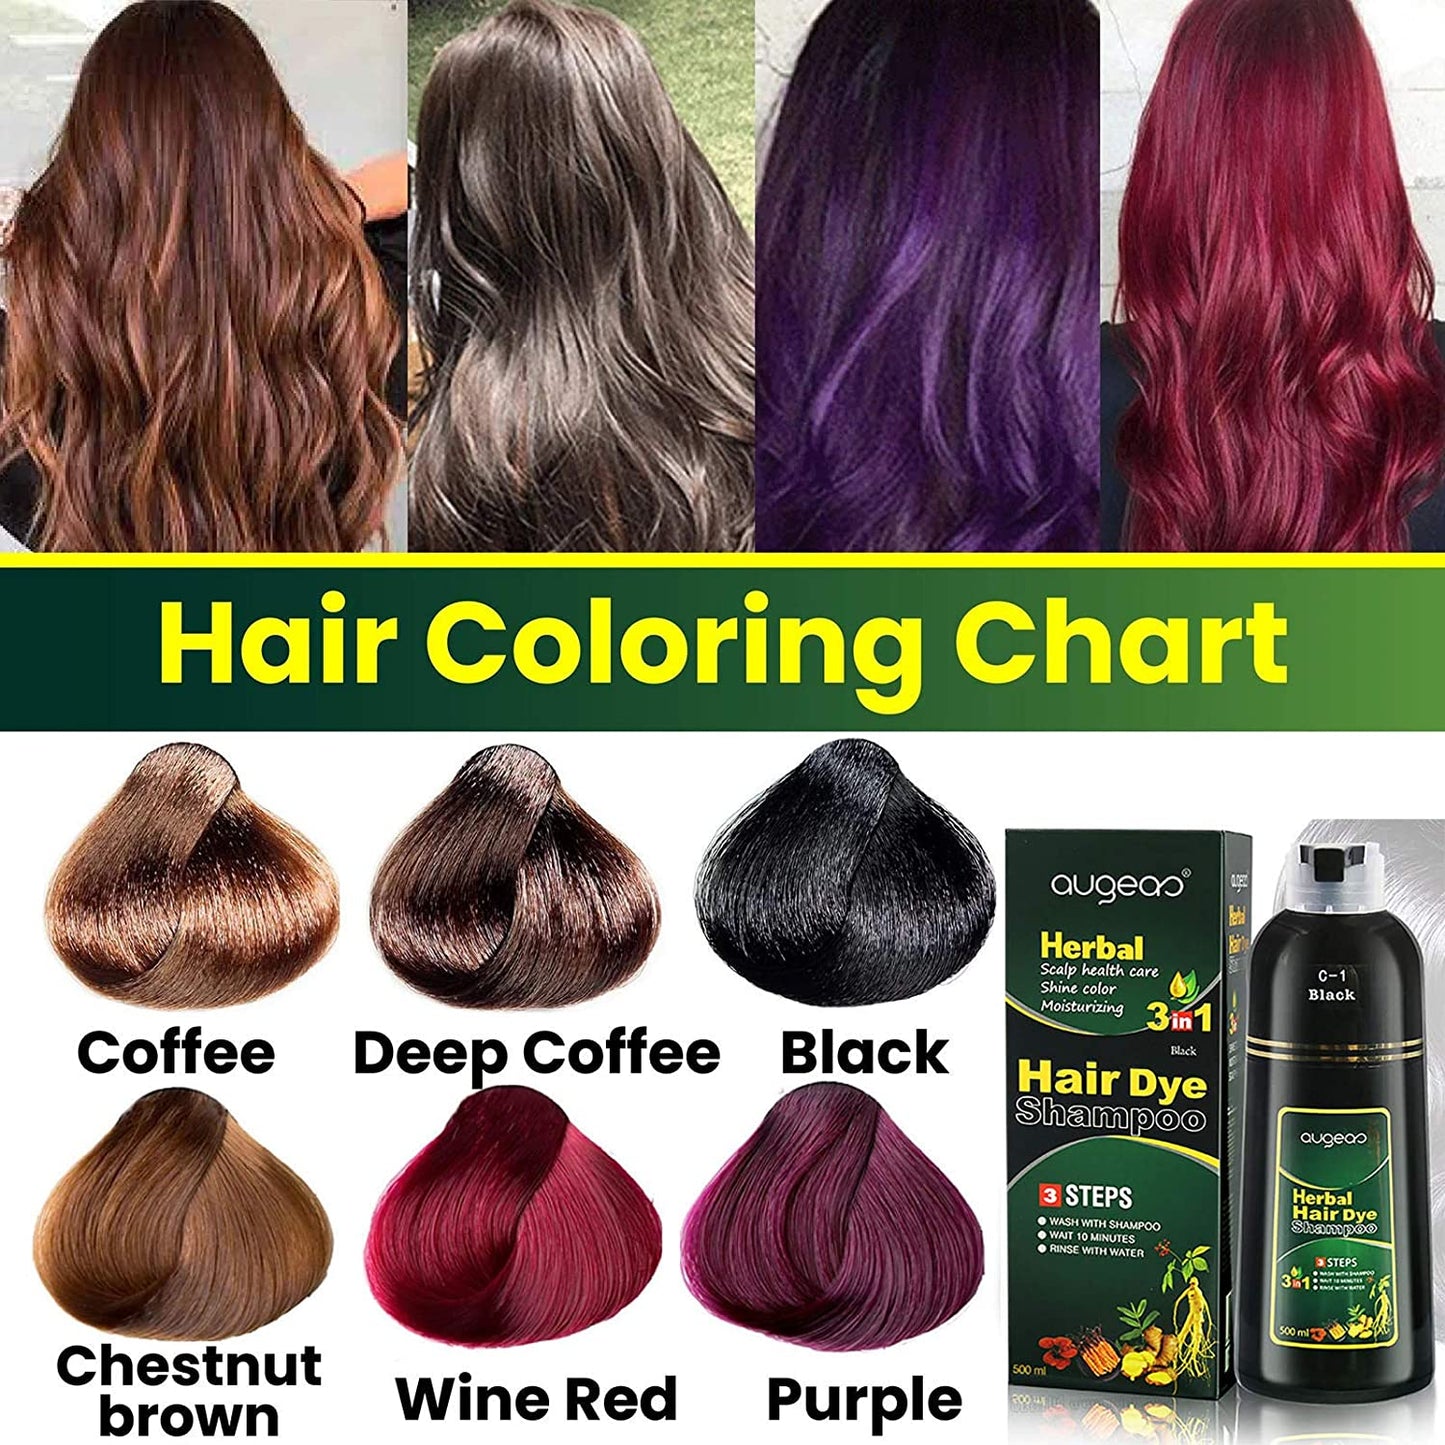 Coffee Hair Color Shampoo | 3 in 1 with a FREE Pair of Gloves | 500ml / 16.9 Fl Oz | Grey Hair Coverage | AUGEAS - SH Salons